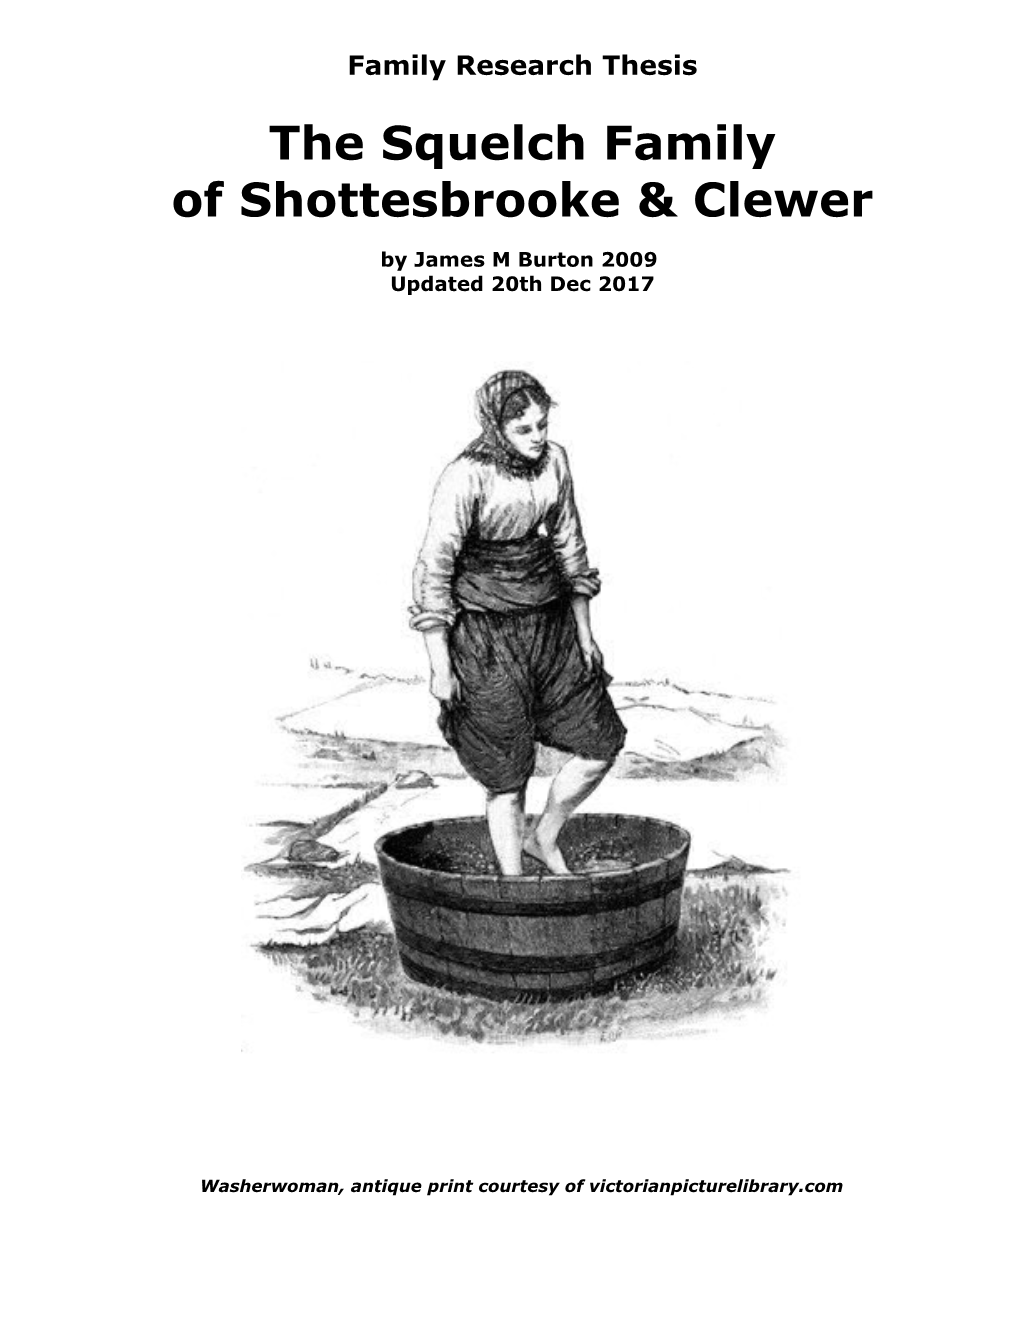 The Squelch Family of Shottesbrooke & Clewer